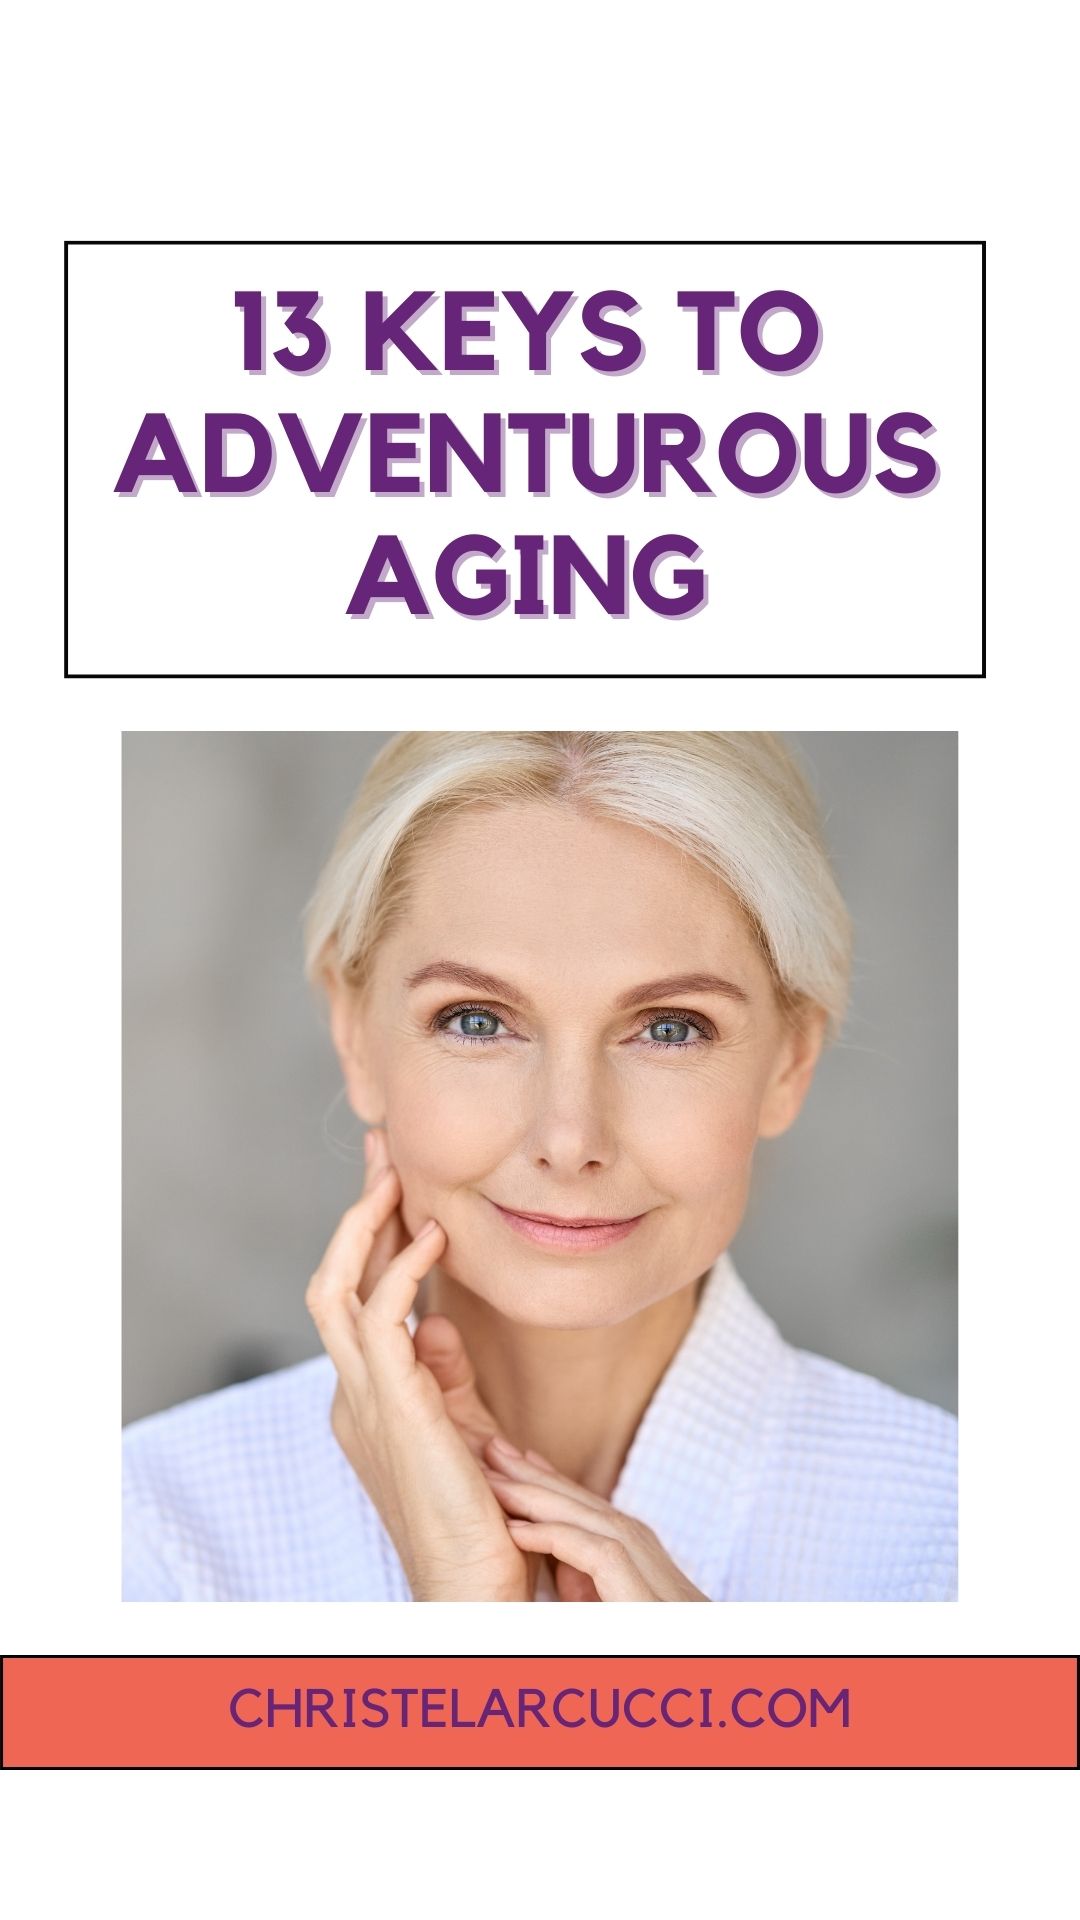 Picture of a beautiful older woman to illustrate the topic of aging gracefully